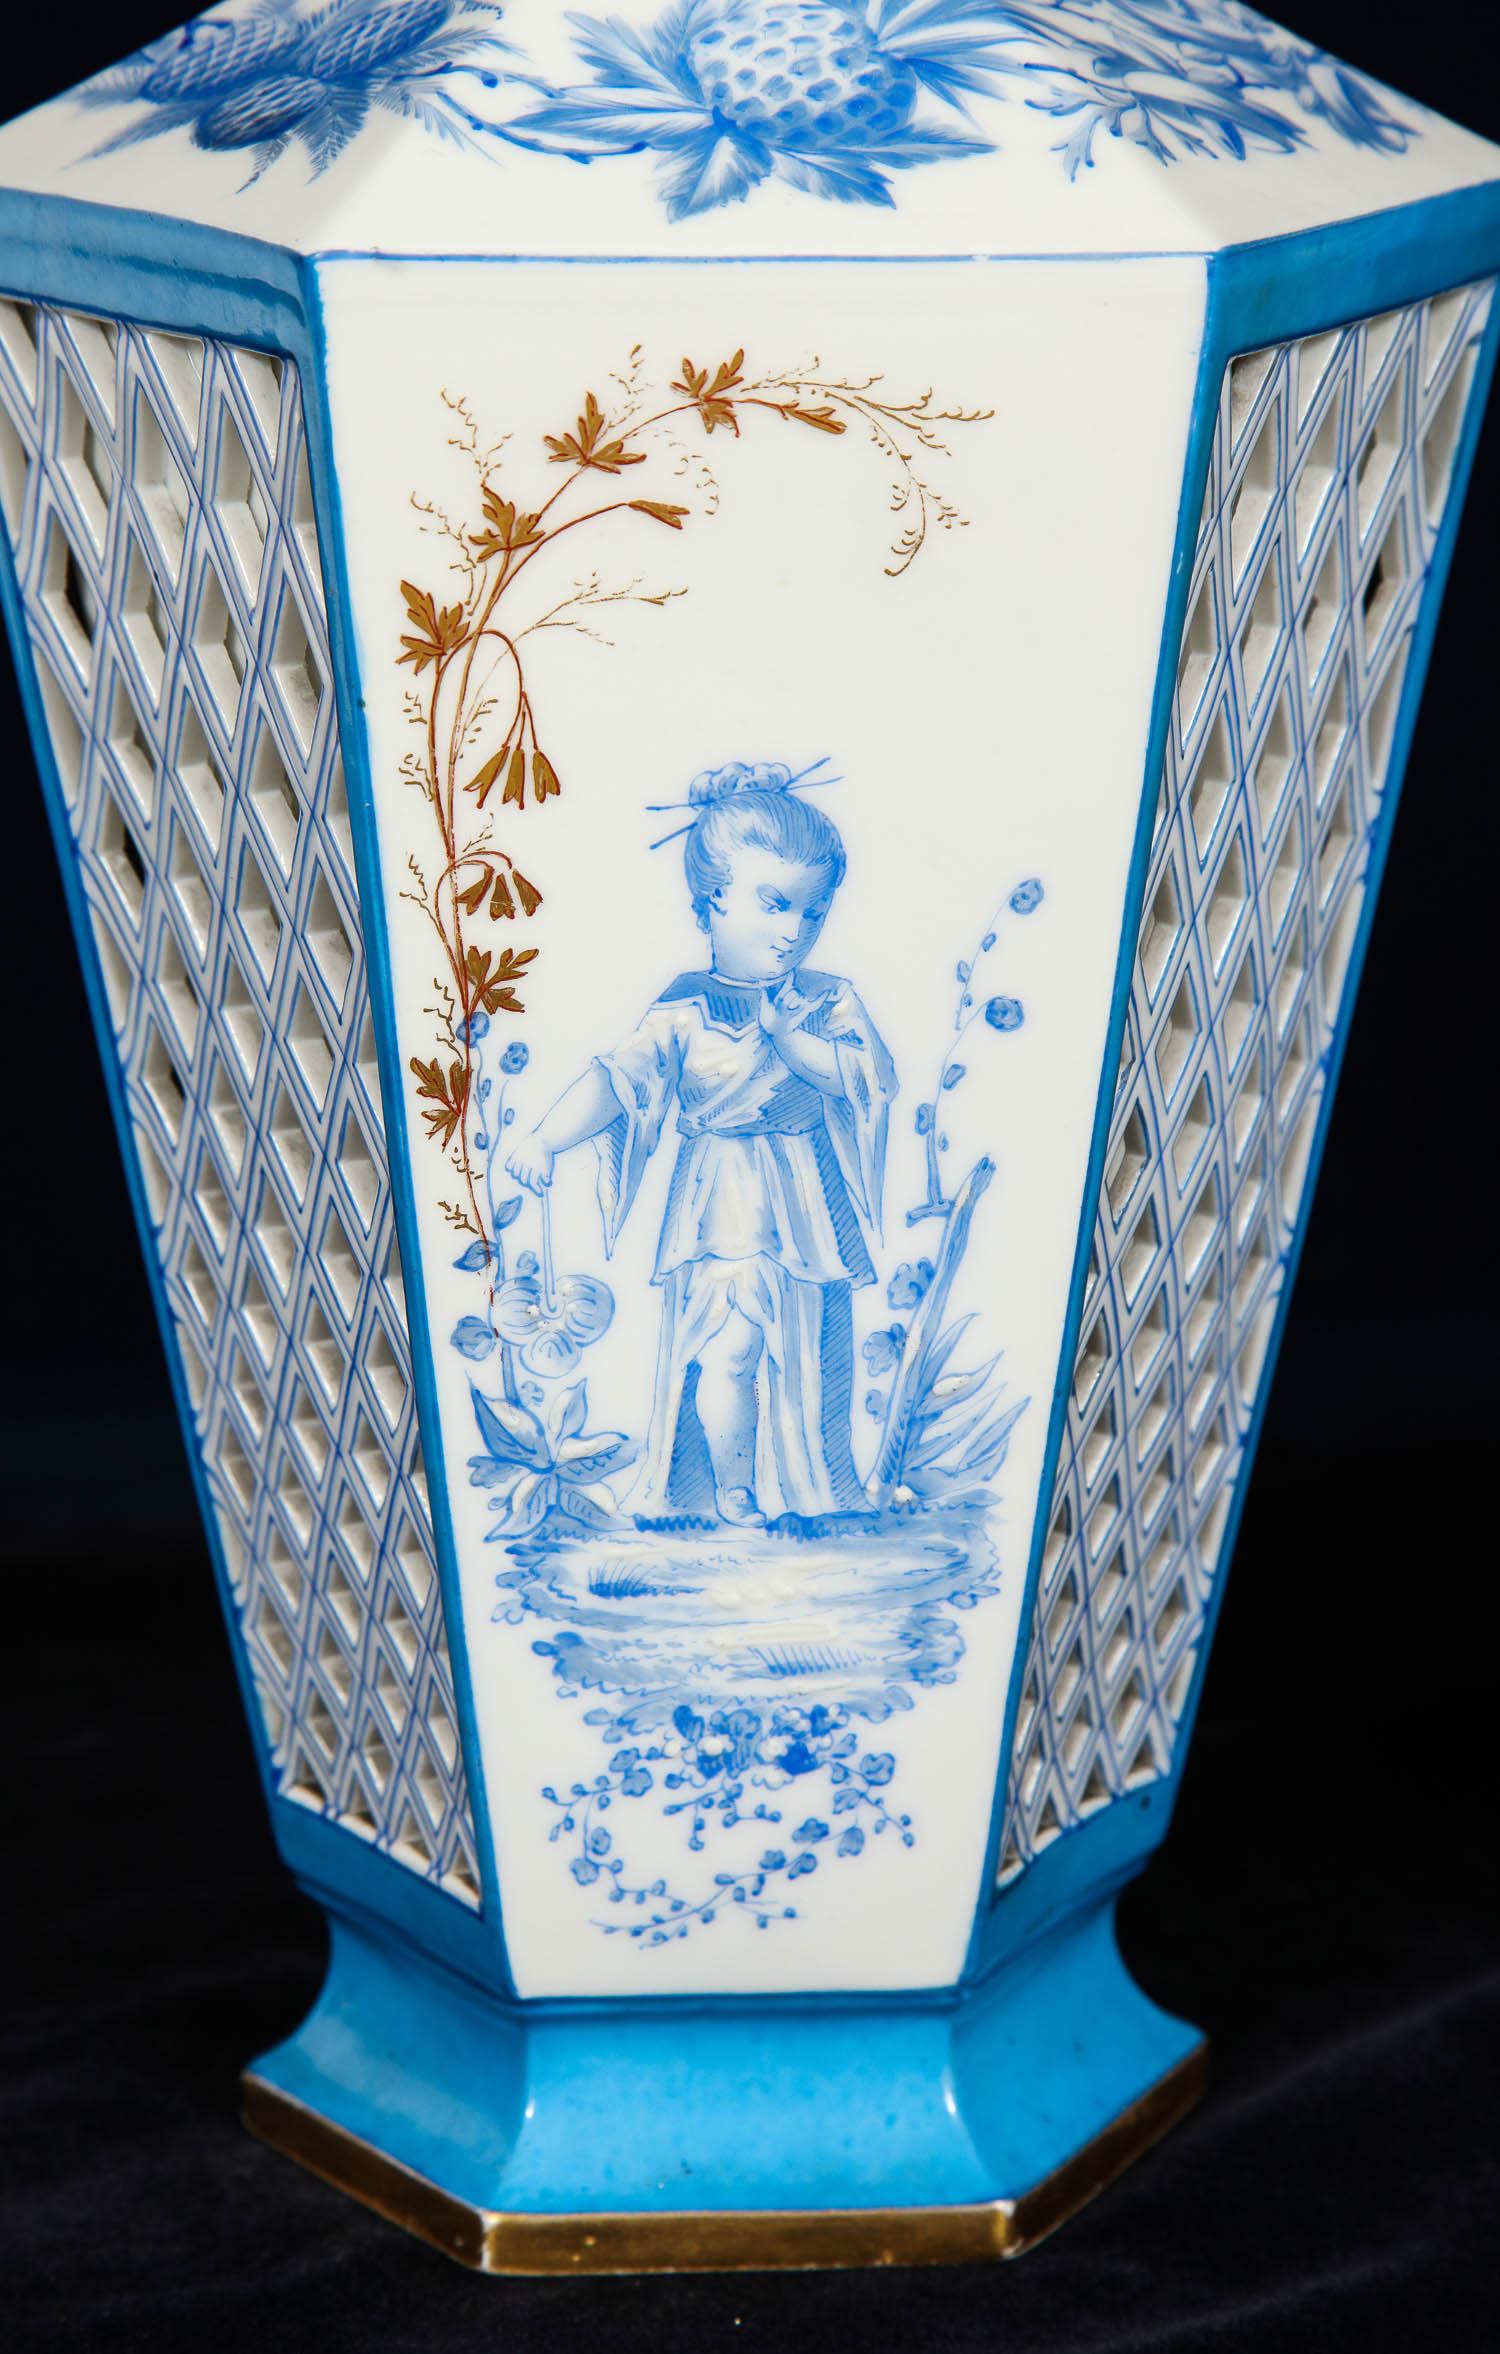 A beautiful pair of French Paris porcelain blue and white chinoiserie style open-work vases. Each is beautifully hand painted with tiffany blue chinoiserie figures of a boy and girl in a field. Each vase is decorated with a double-walled open